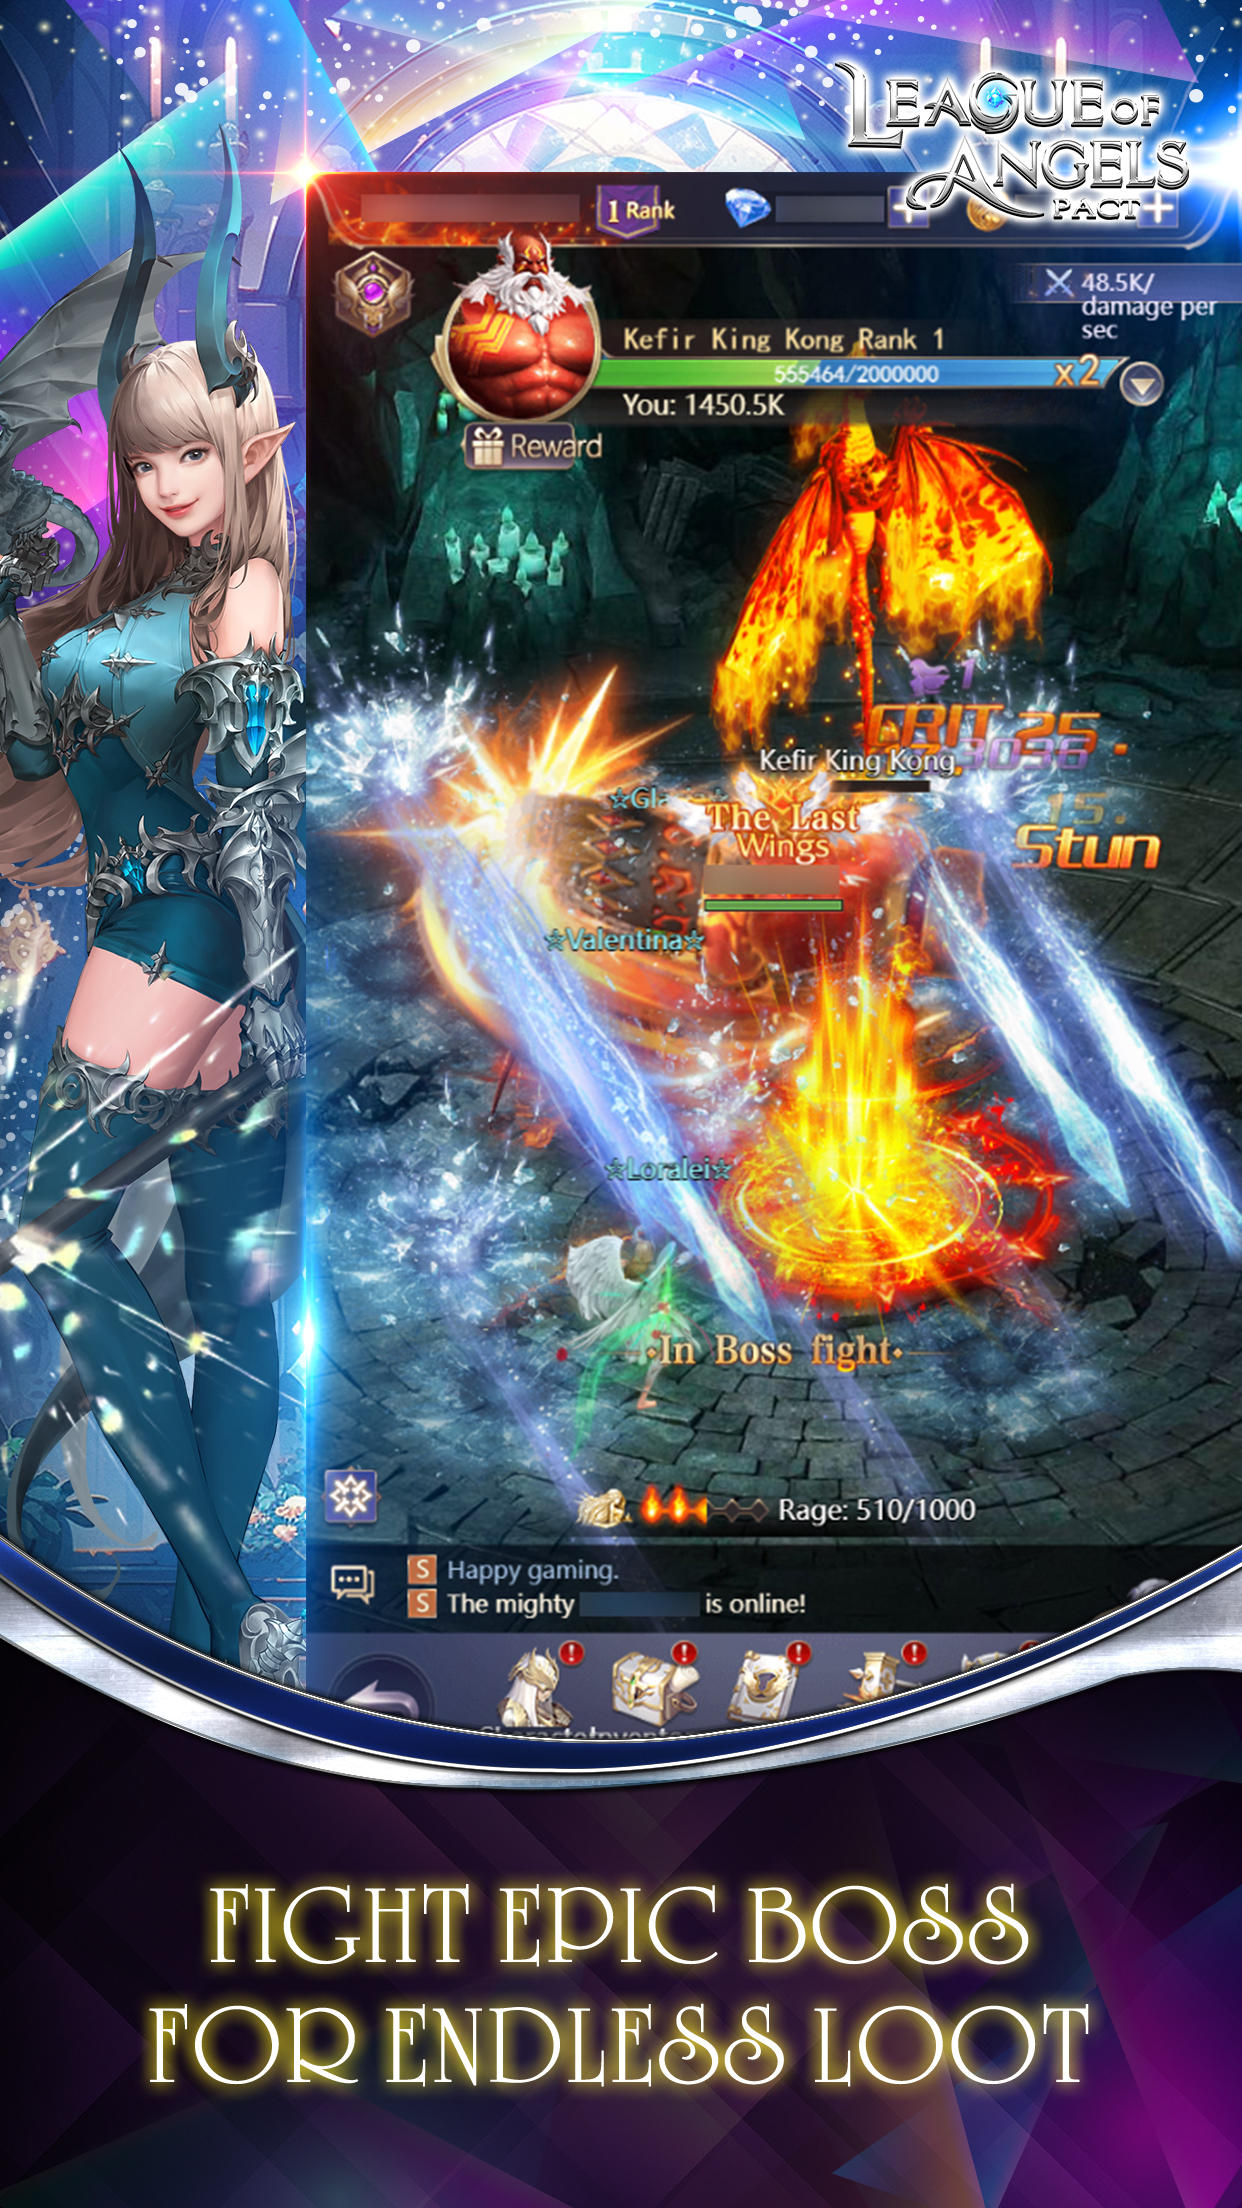 Screenshot of League of Angels: Pact